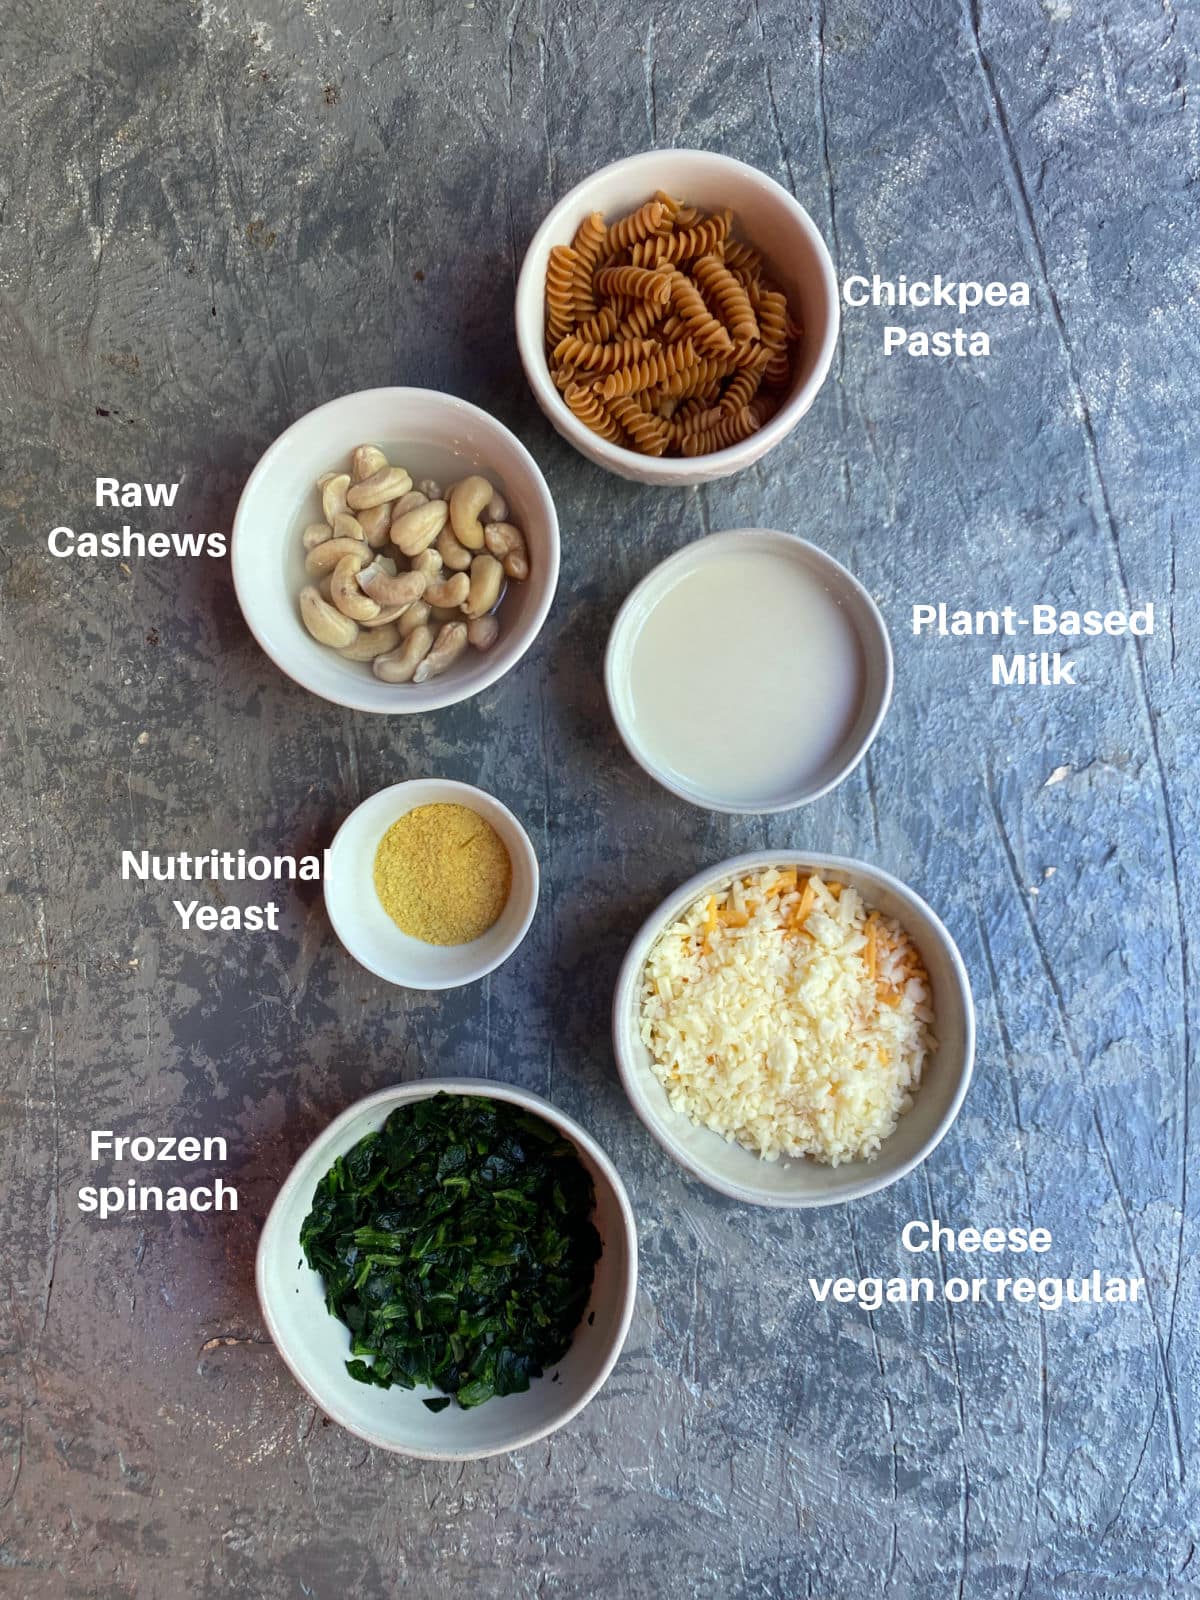 Ingredients for High Protein Creamed Spinach Pasta Bake